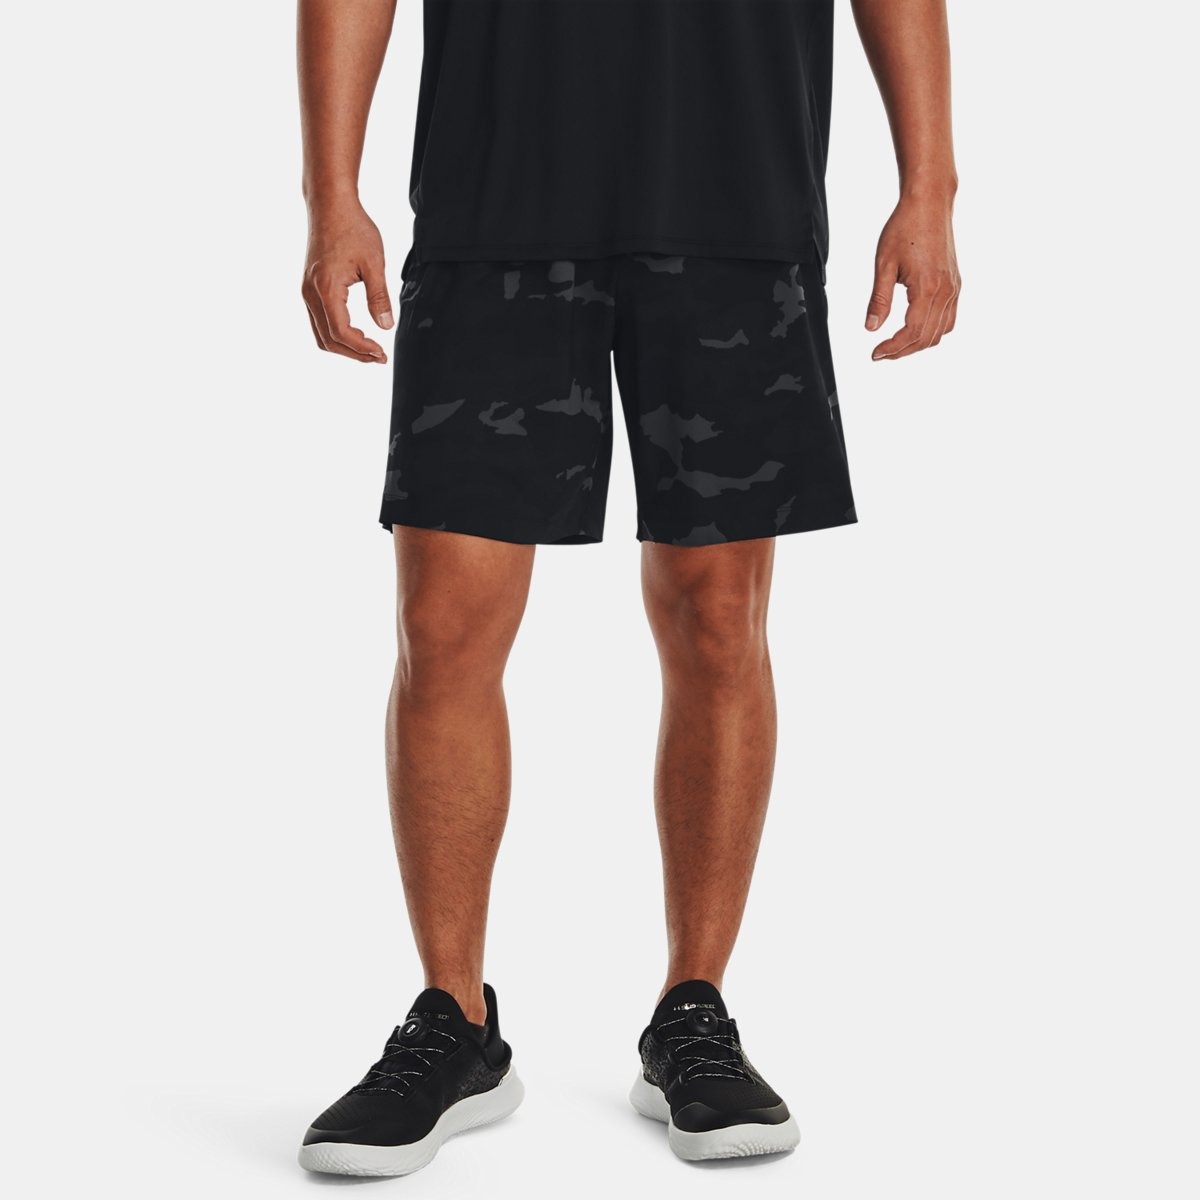 Shorts in Black for Man from Under Armour GOOFASH